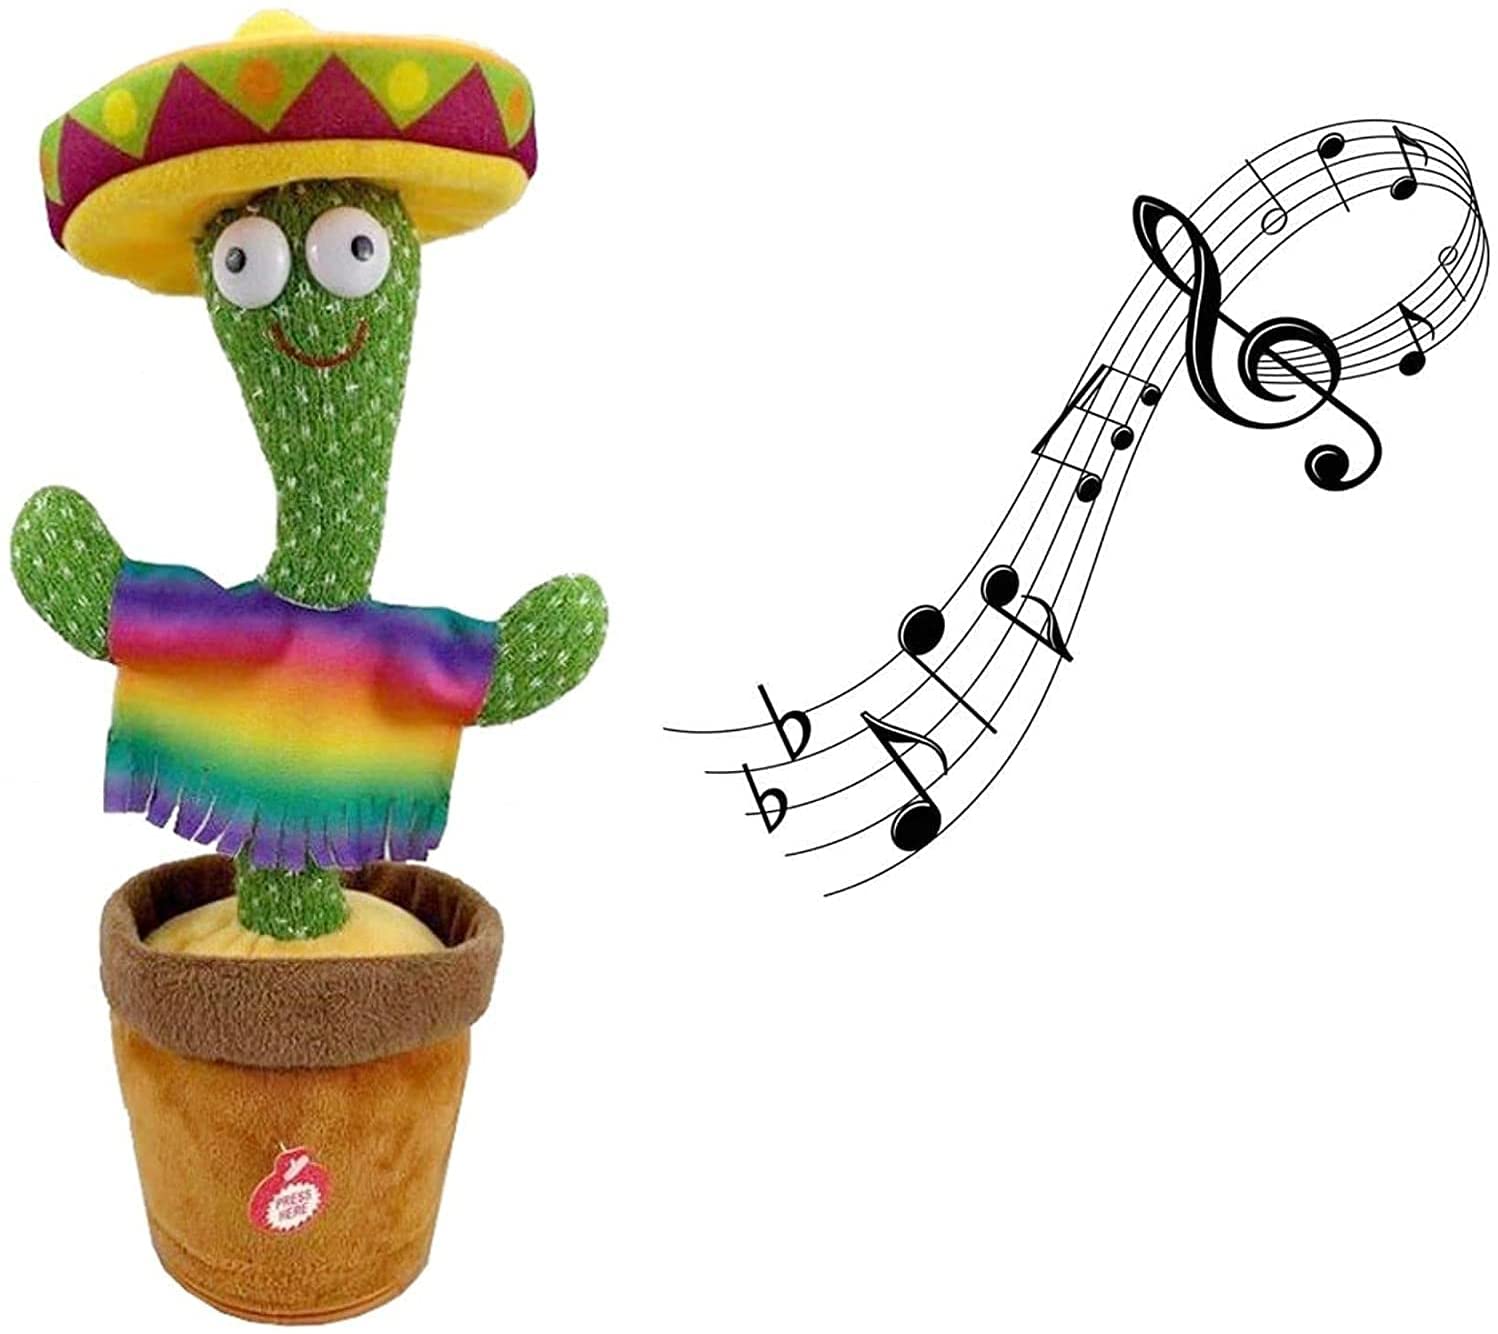 Private: Dancing, Singing and Shaking Cactus Plush Toy- Repeat Whatever You Said, With 120 English Songs for Kids (No Batteries) （Mexico)